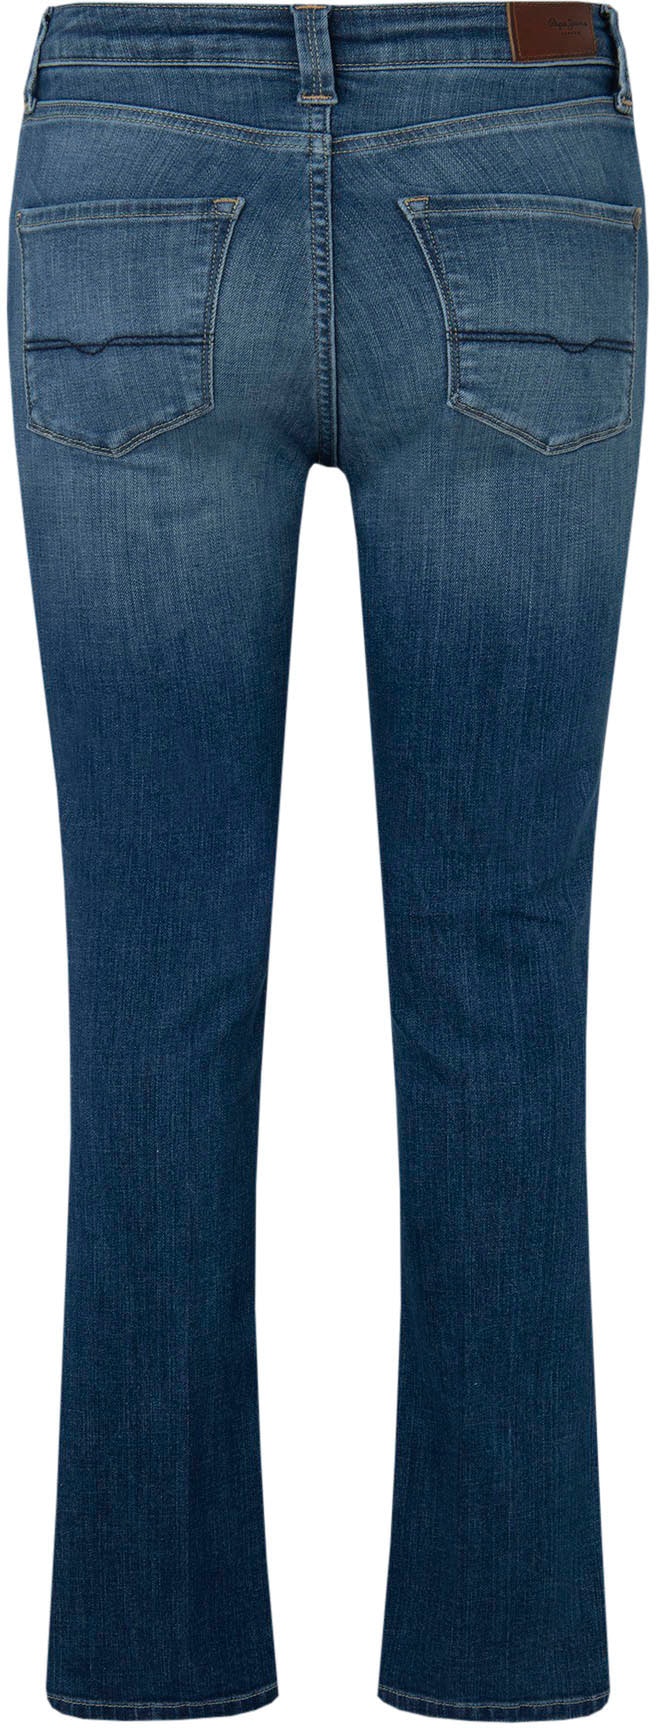 Pepe Jeans Bootcut-Jeans »Dion kaufen Flare« online